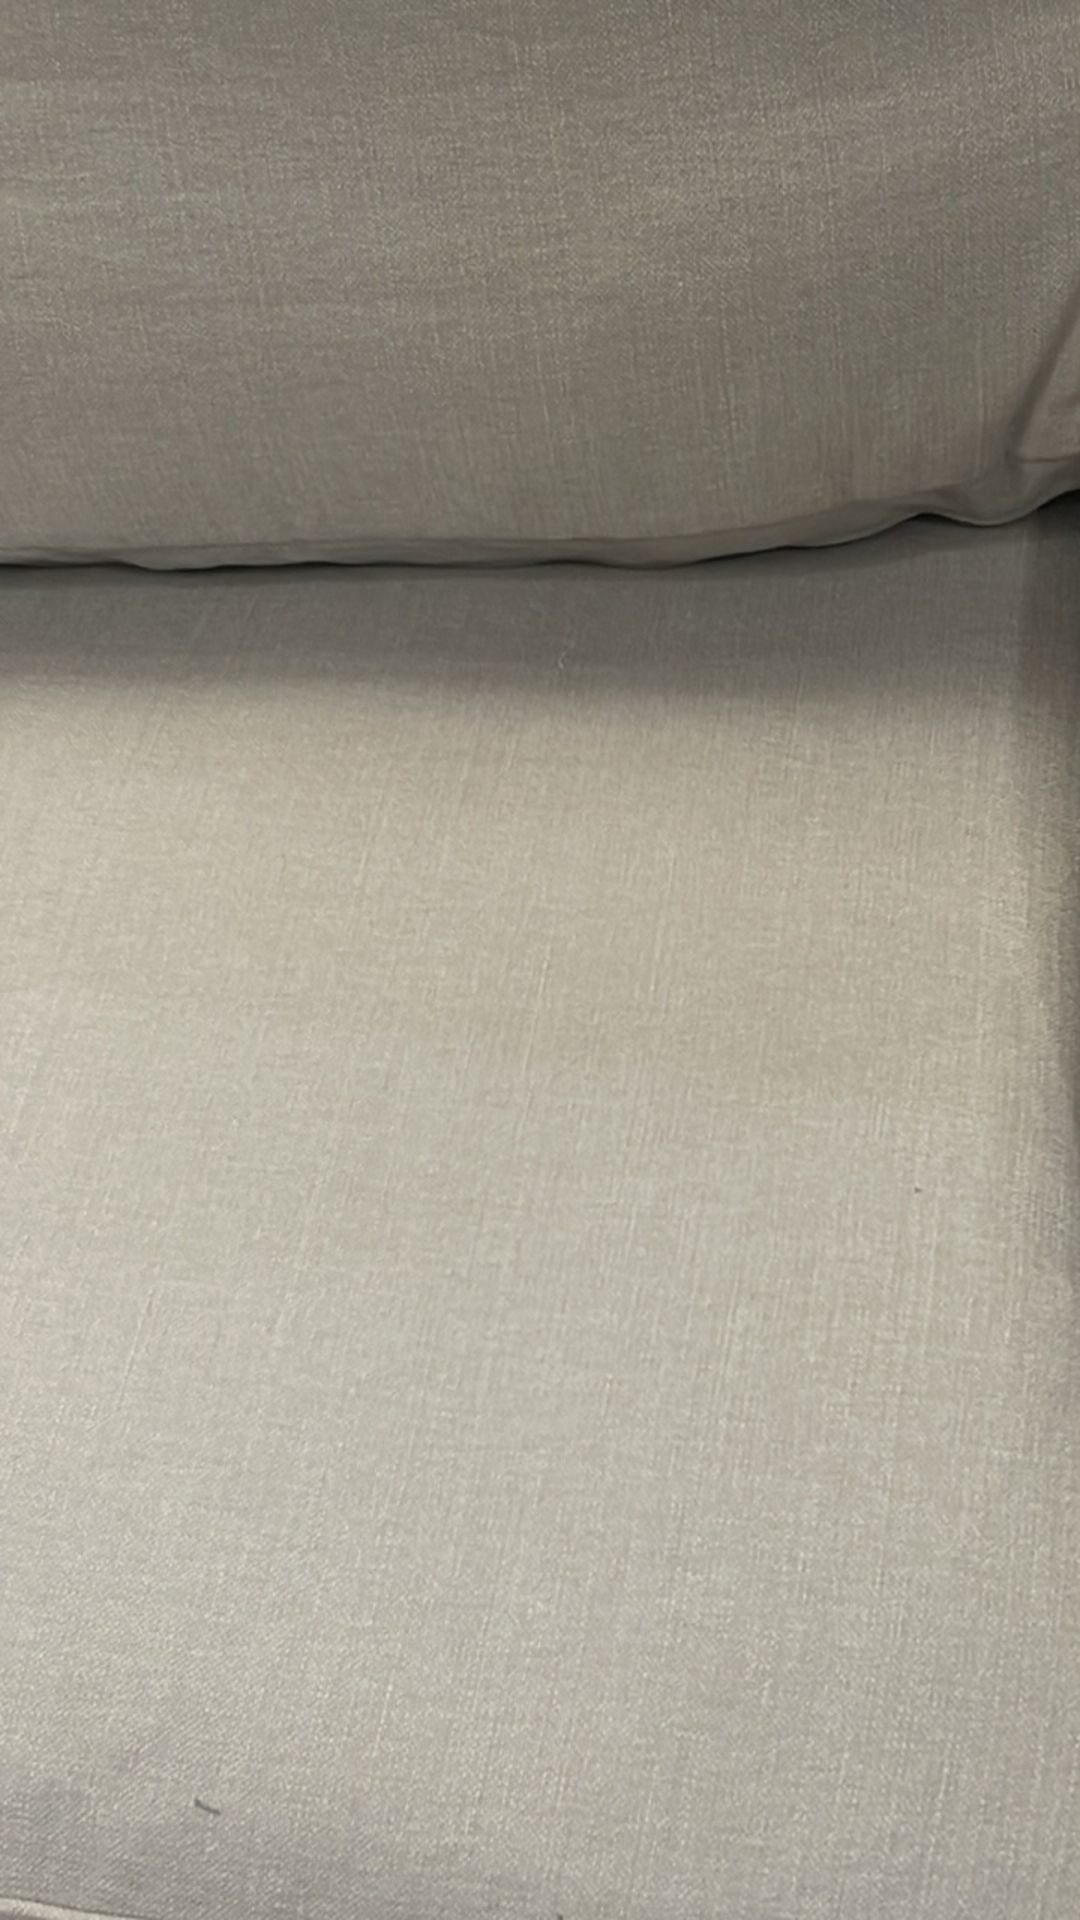 Bluebell 3 Seat Sofa (Breaks Down) In Taupe Brushed Linen Cotton RRP - £2470 - Image 6 of 6